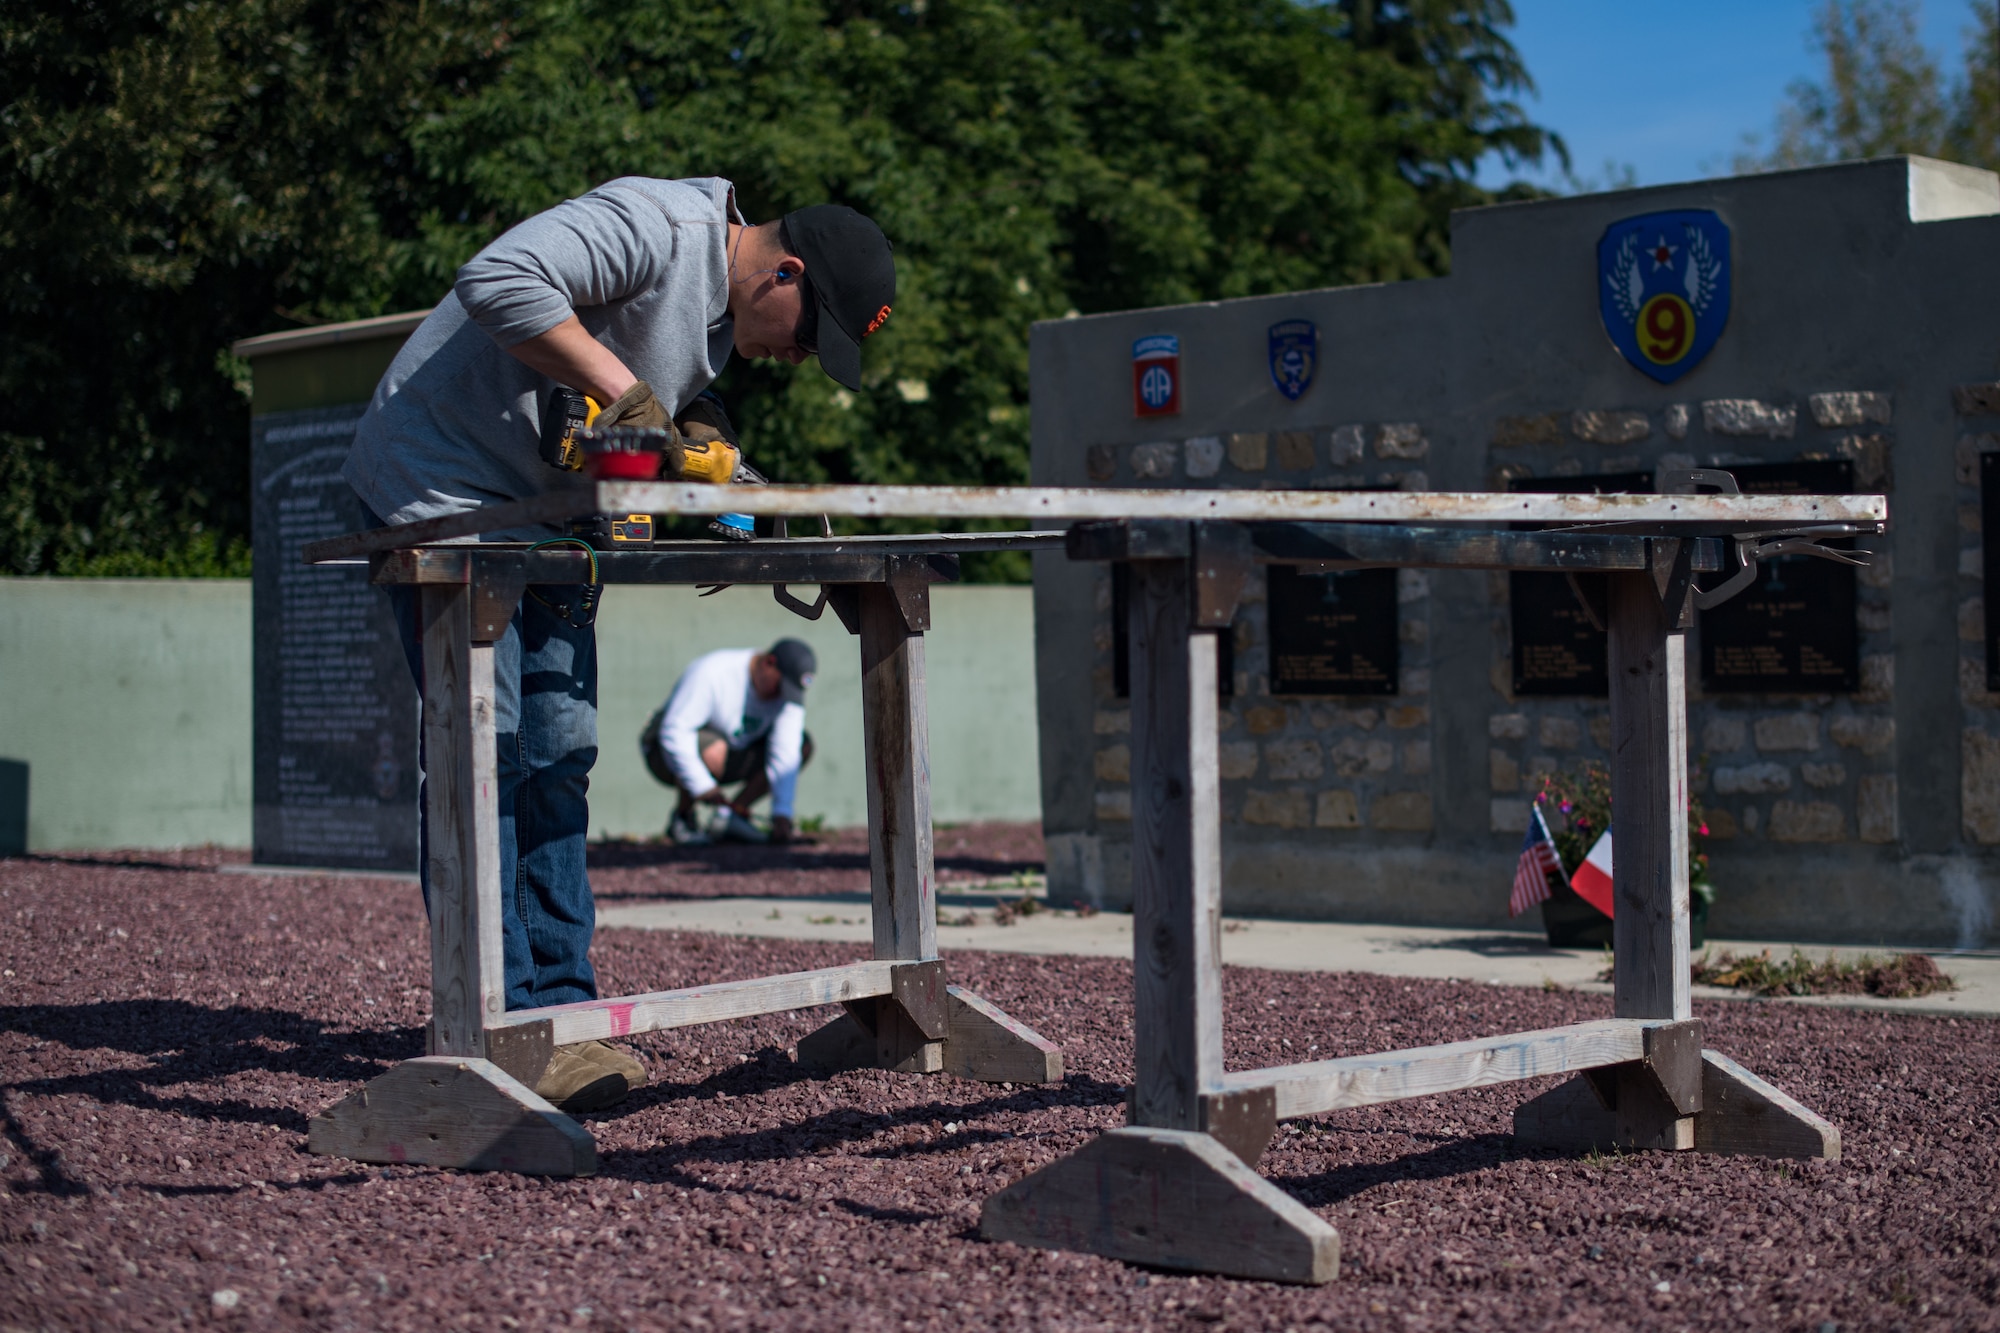 U.S. Air Force Staff Sgt. Matthew Evans, 435th Construction Training Squadron structural contingency instructor, brushes a metal frame at a WWII memorial in Picauville, France, April 30, 2019. The frame was used to anchor a display case holding an aircraft engine that was shot down on D-Day. (U.S. Air Force photo by Staff Sgt. Devin Boyer)